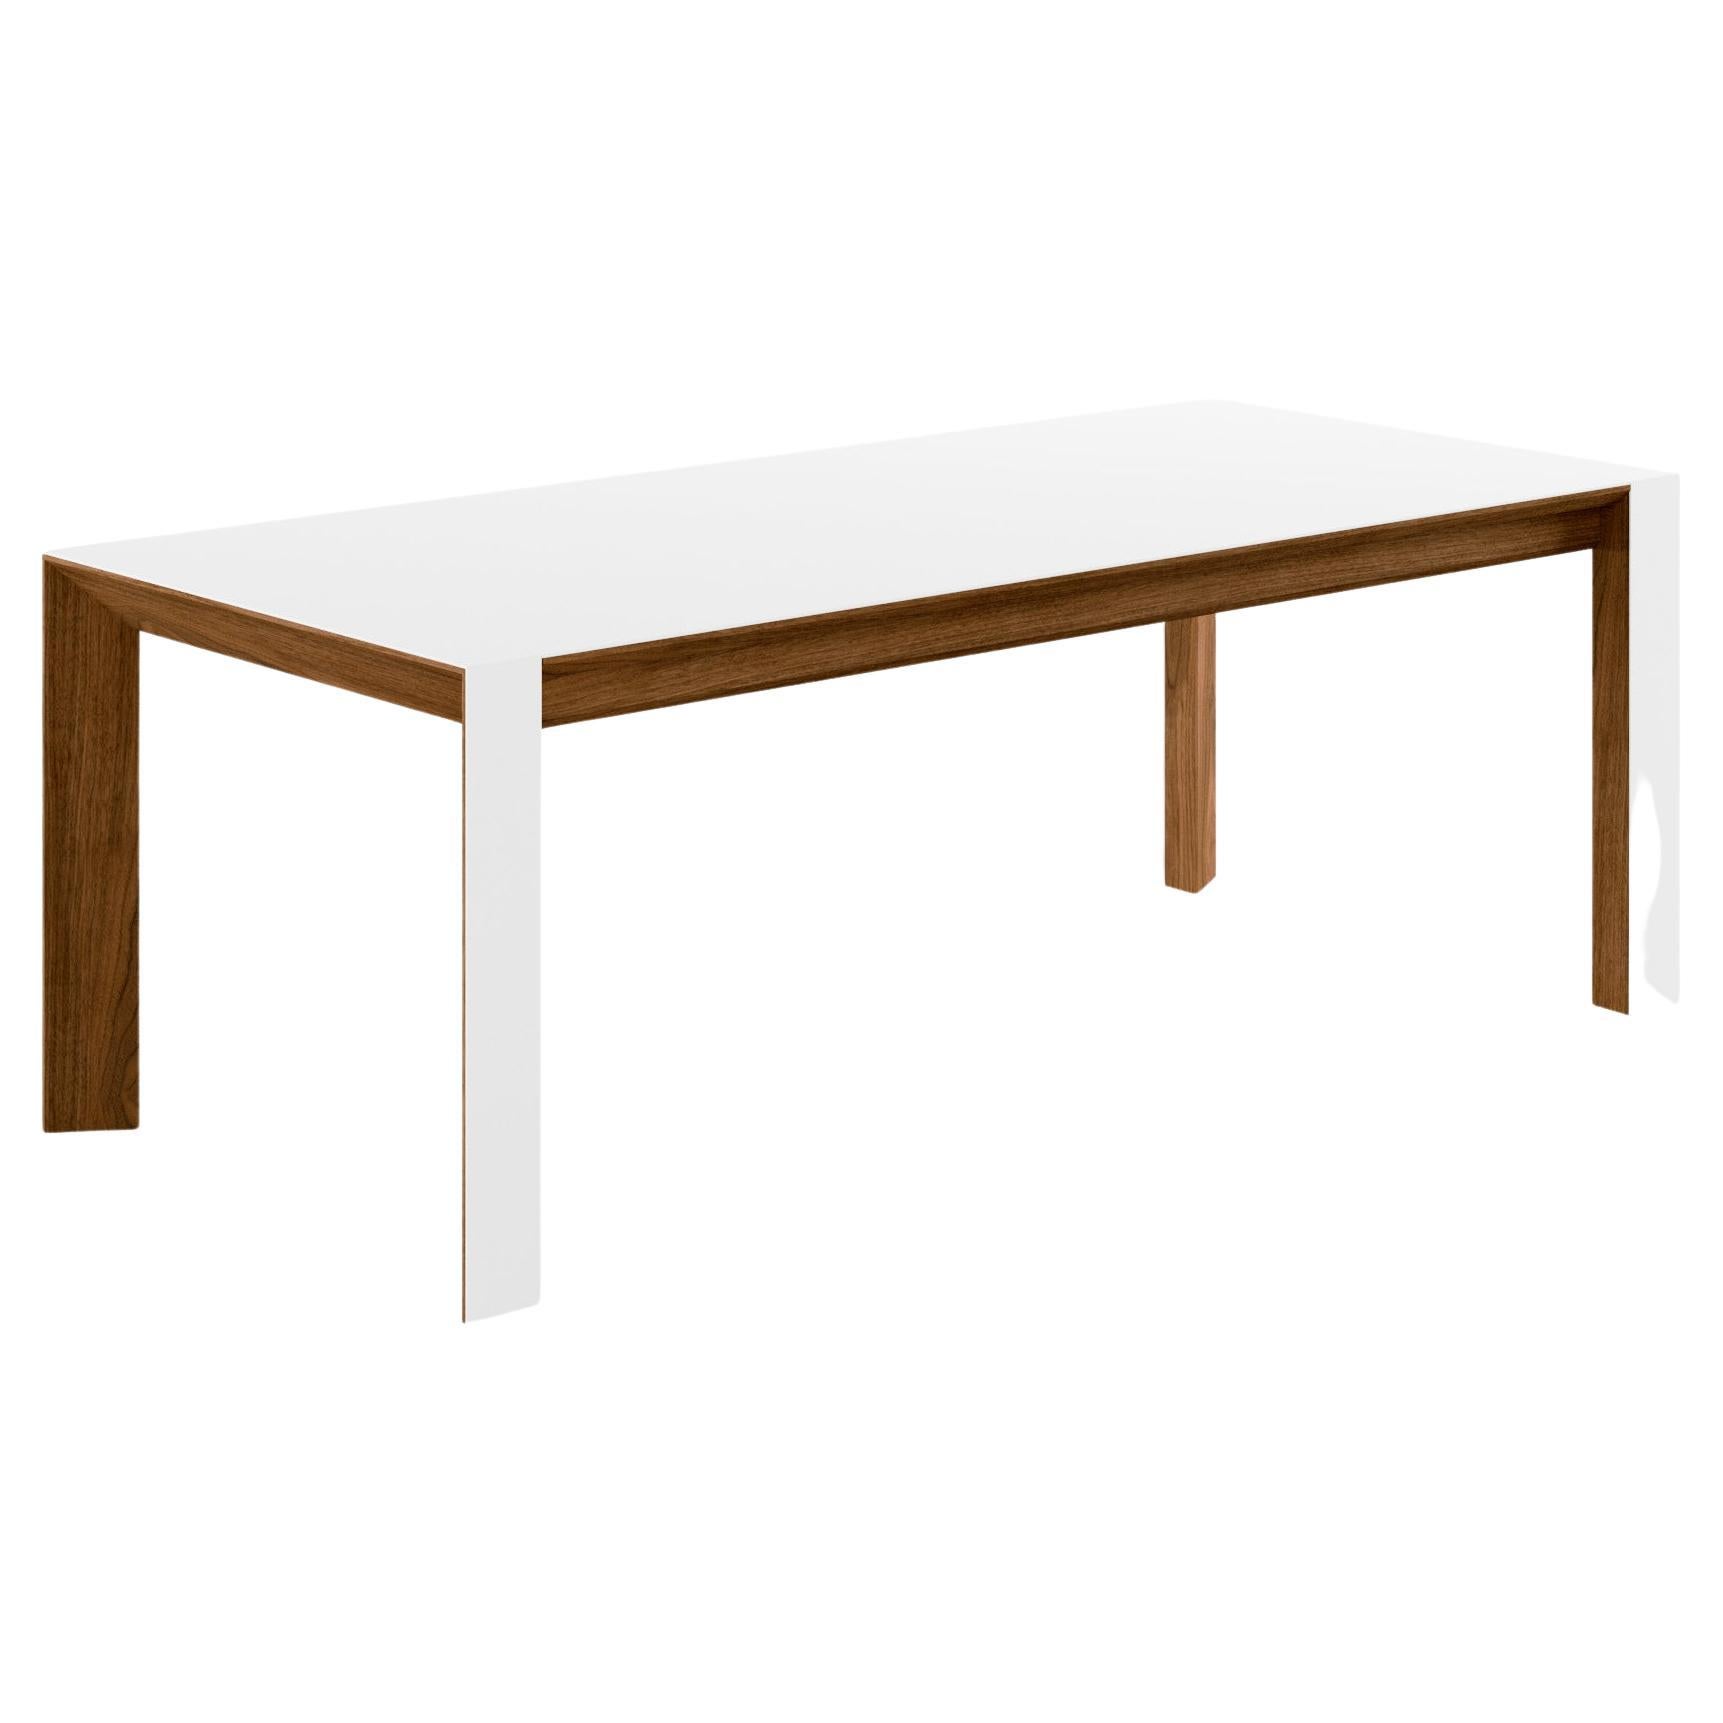 Gm7700 Table with Corian White on Table and Legs - Design by Nissen & Gehl MDD For Sale